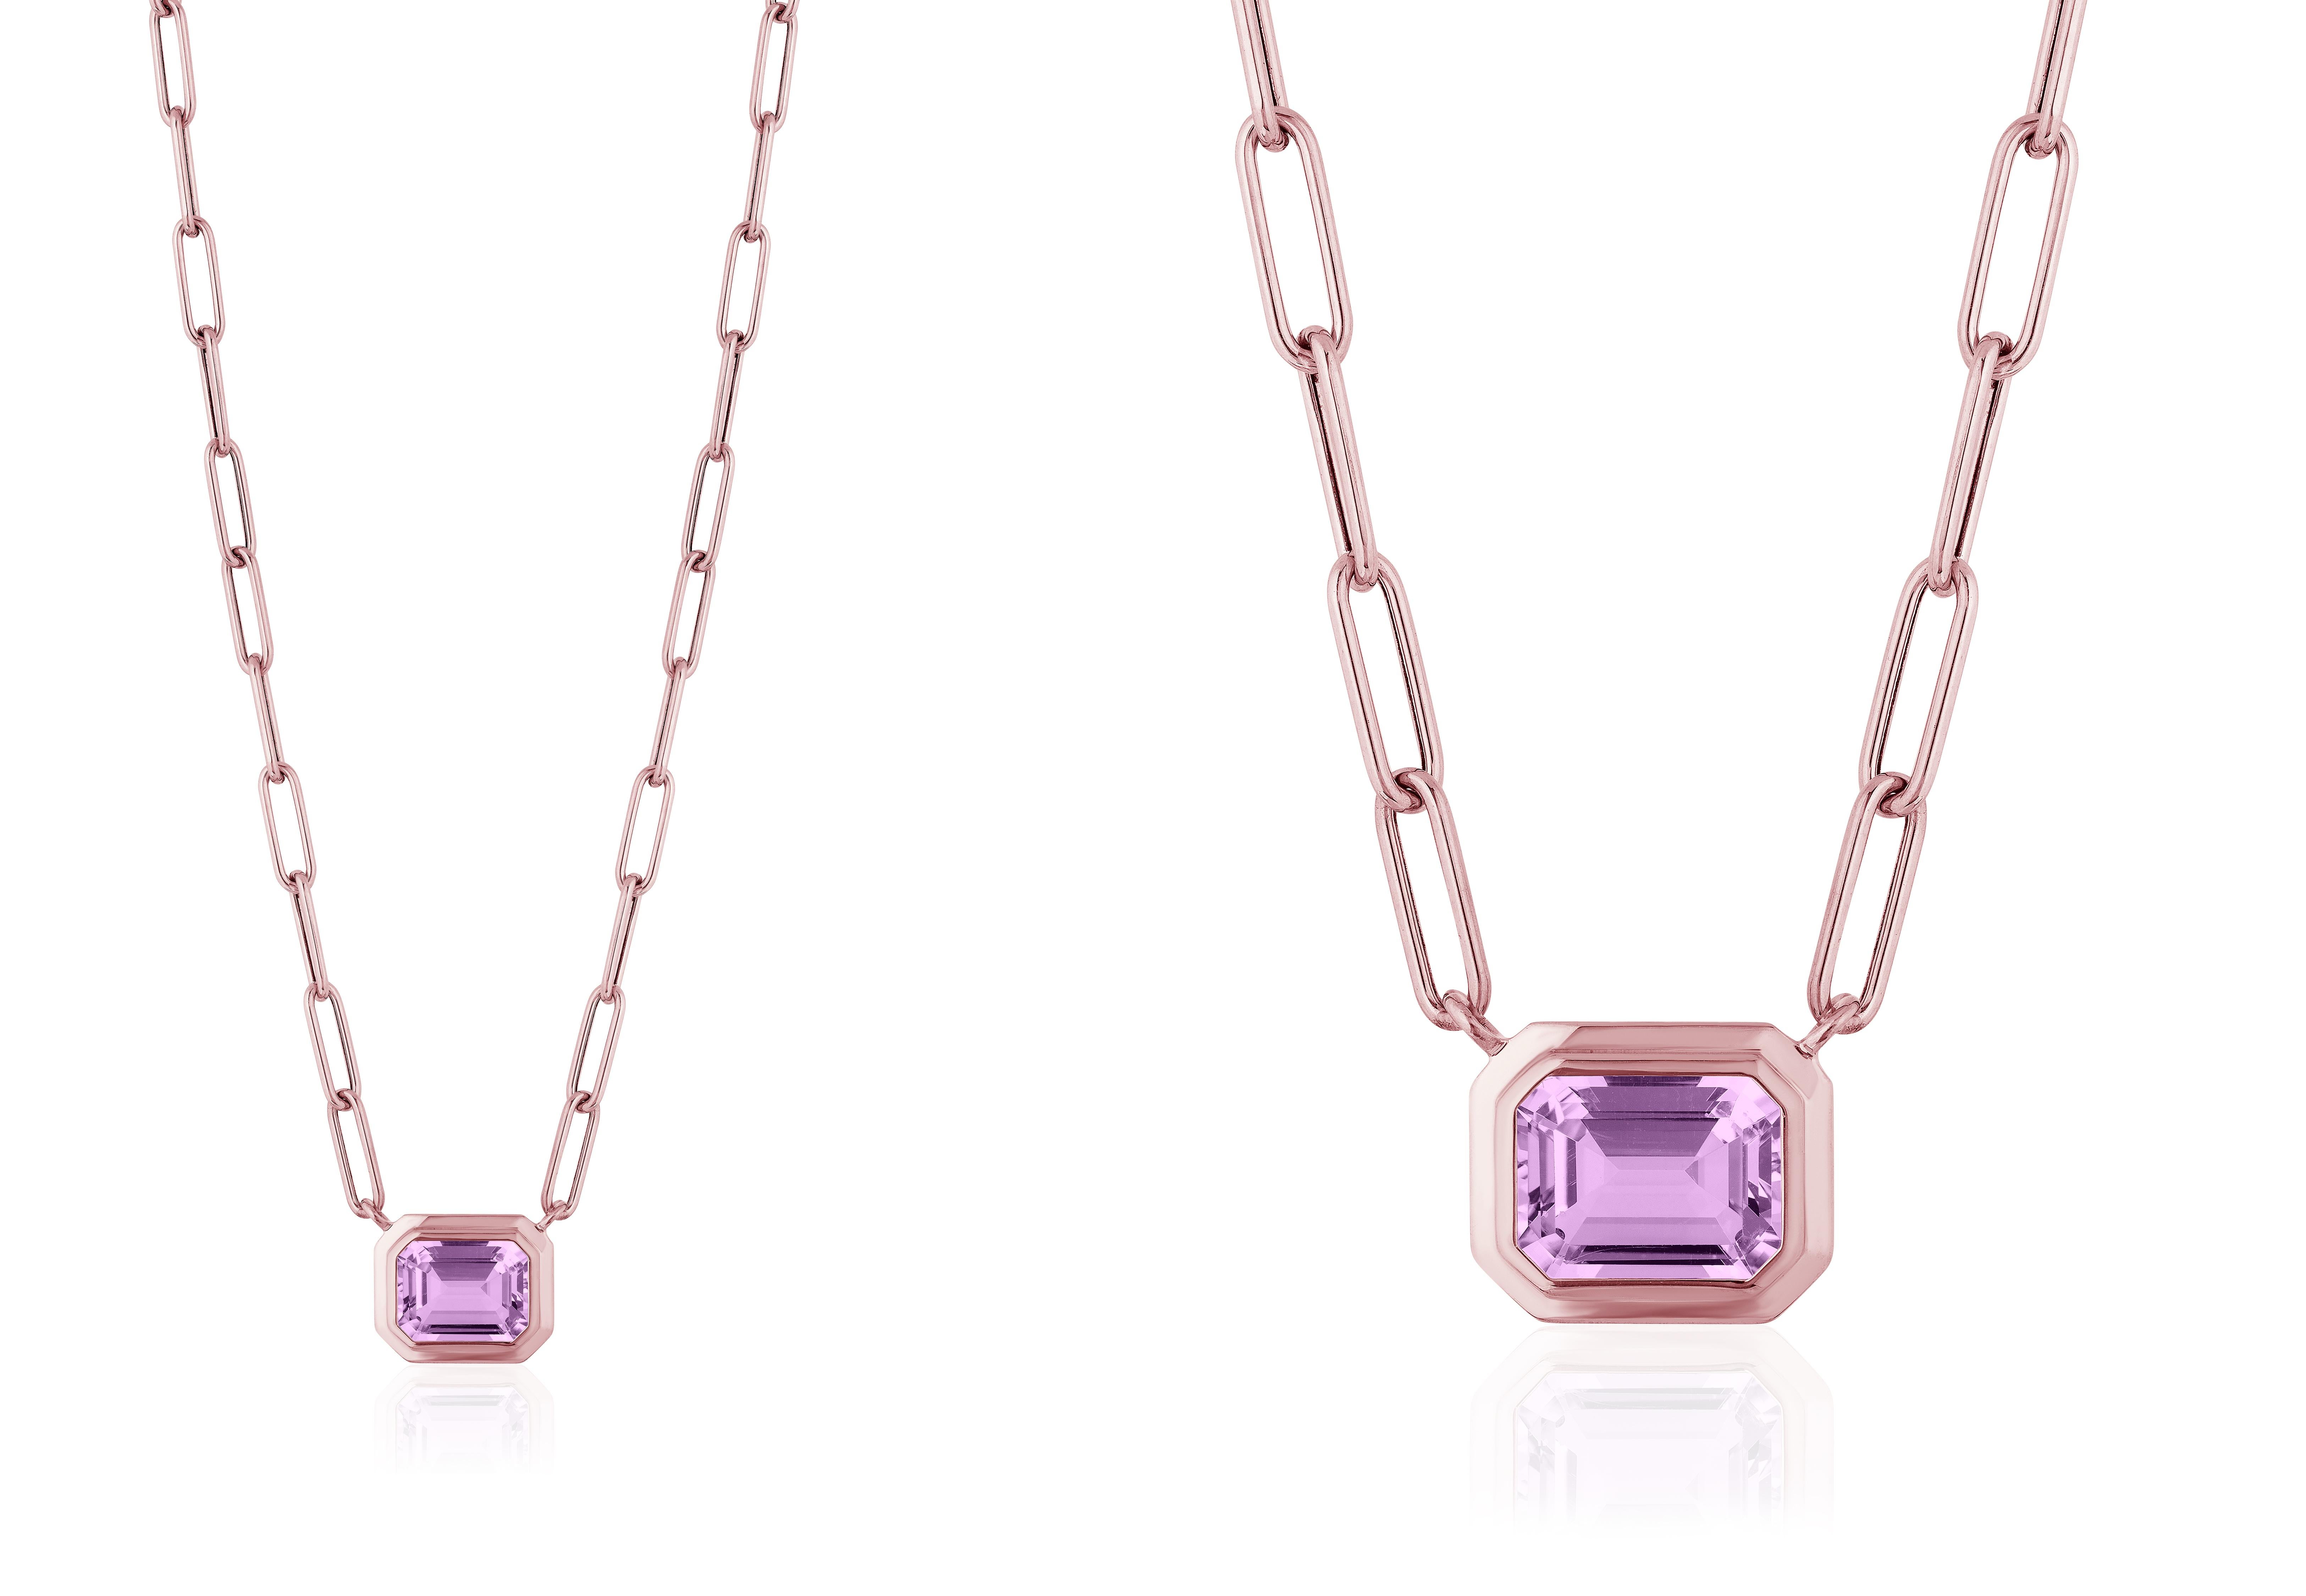 This beautiful East-West Lavender Amethyst Emerald Cut Bezel Set Pendant in 18K Rose Gold is from our ‘Manhattan’ Collection. Minimalist lines yet bold structures are what our Manhattan Collection is all about. Our pieces represent the famous